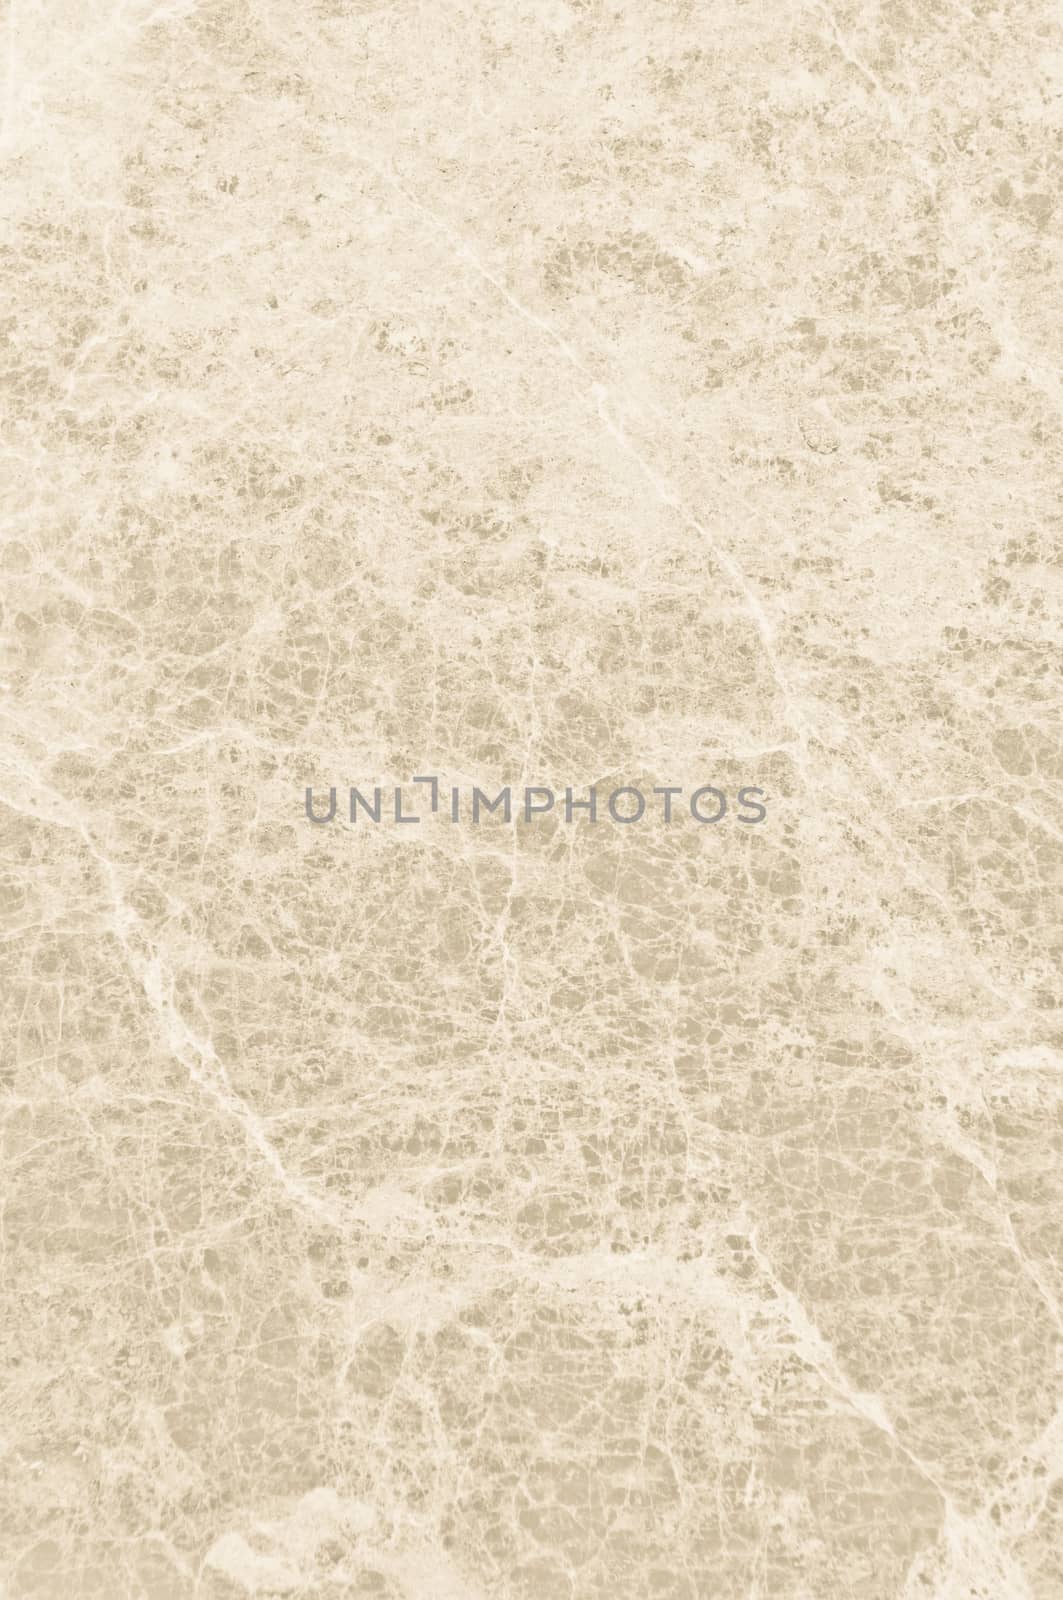 Textured marble background texture pattern with light 
brownish tones